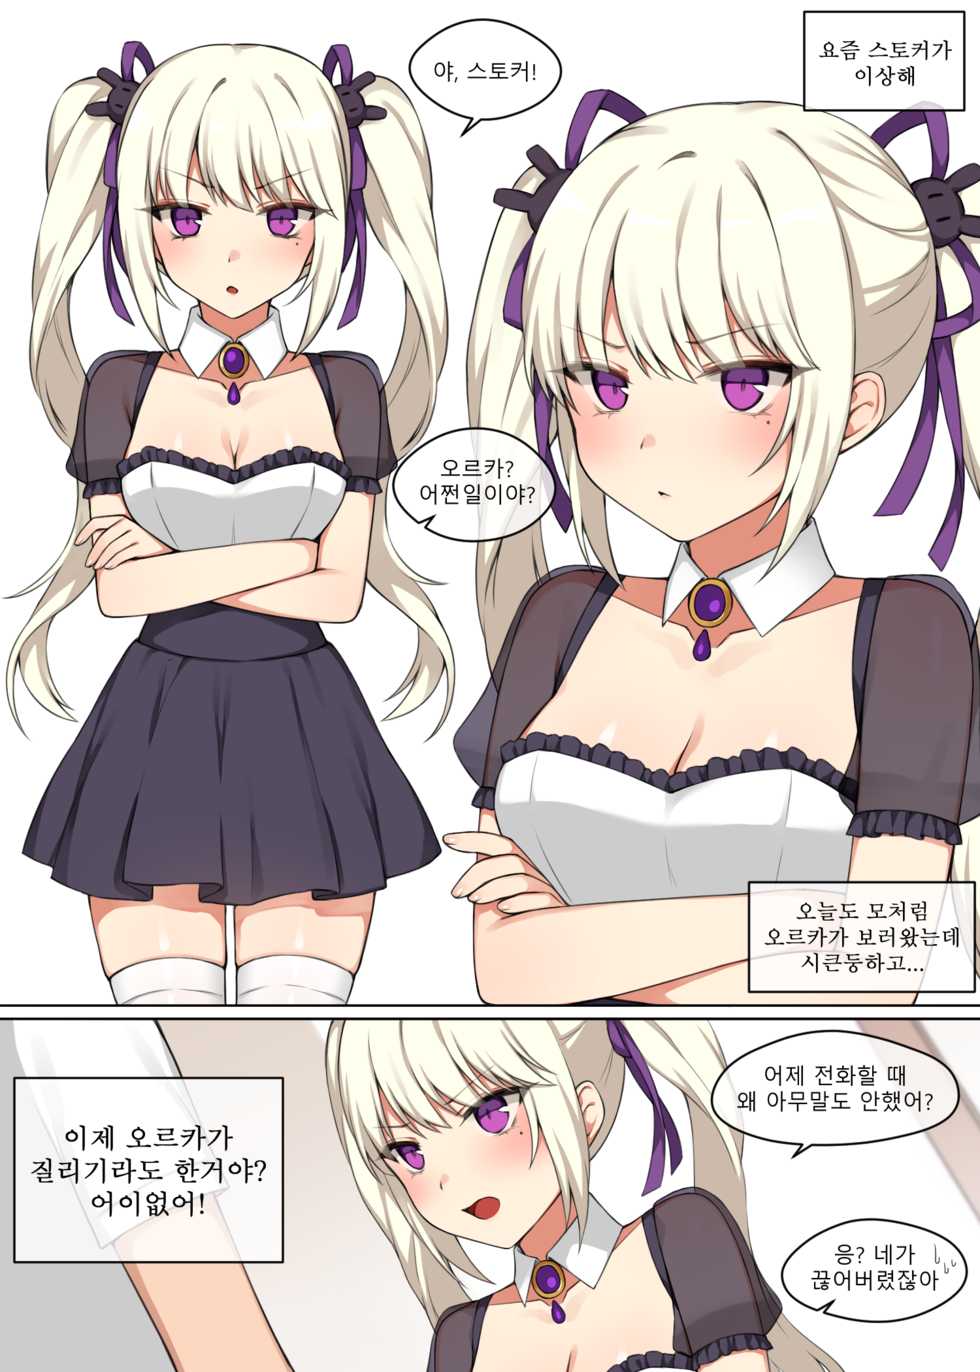 [CANAPE] 오르카는 관심이 필요해! / Orca needs your attention!  [Korean] [Decensored] - Page 2